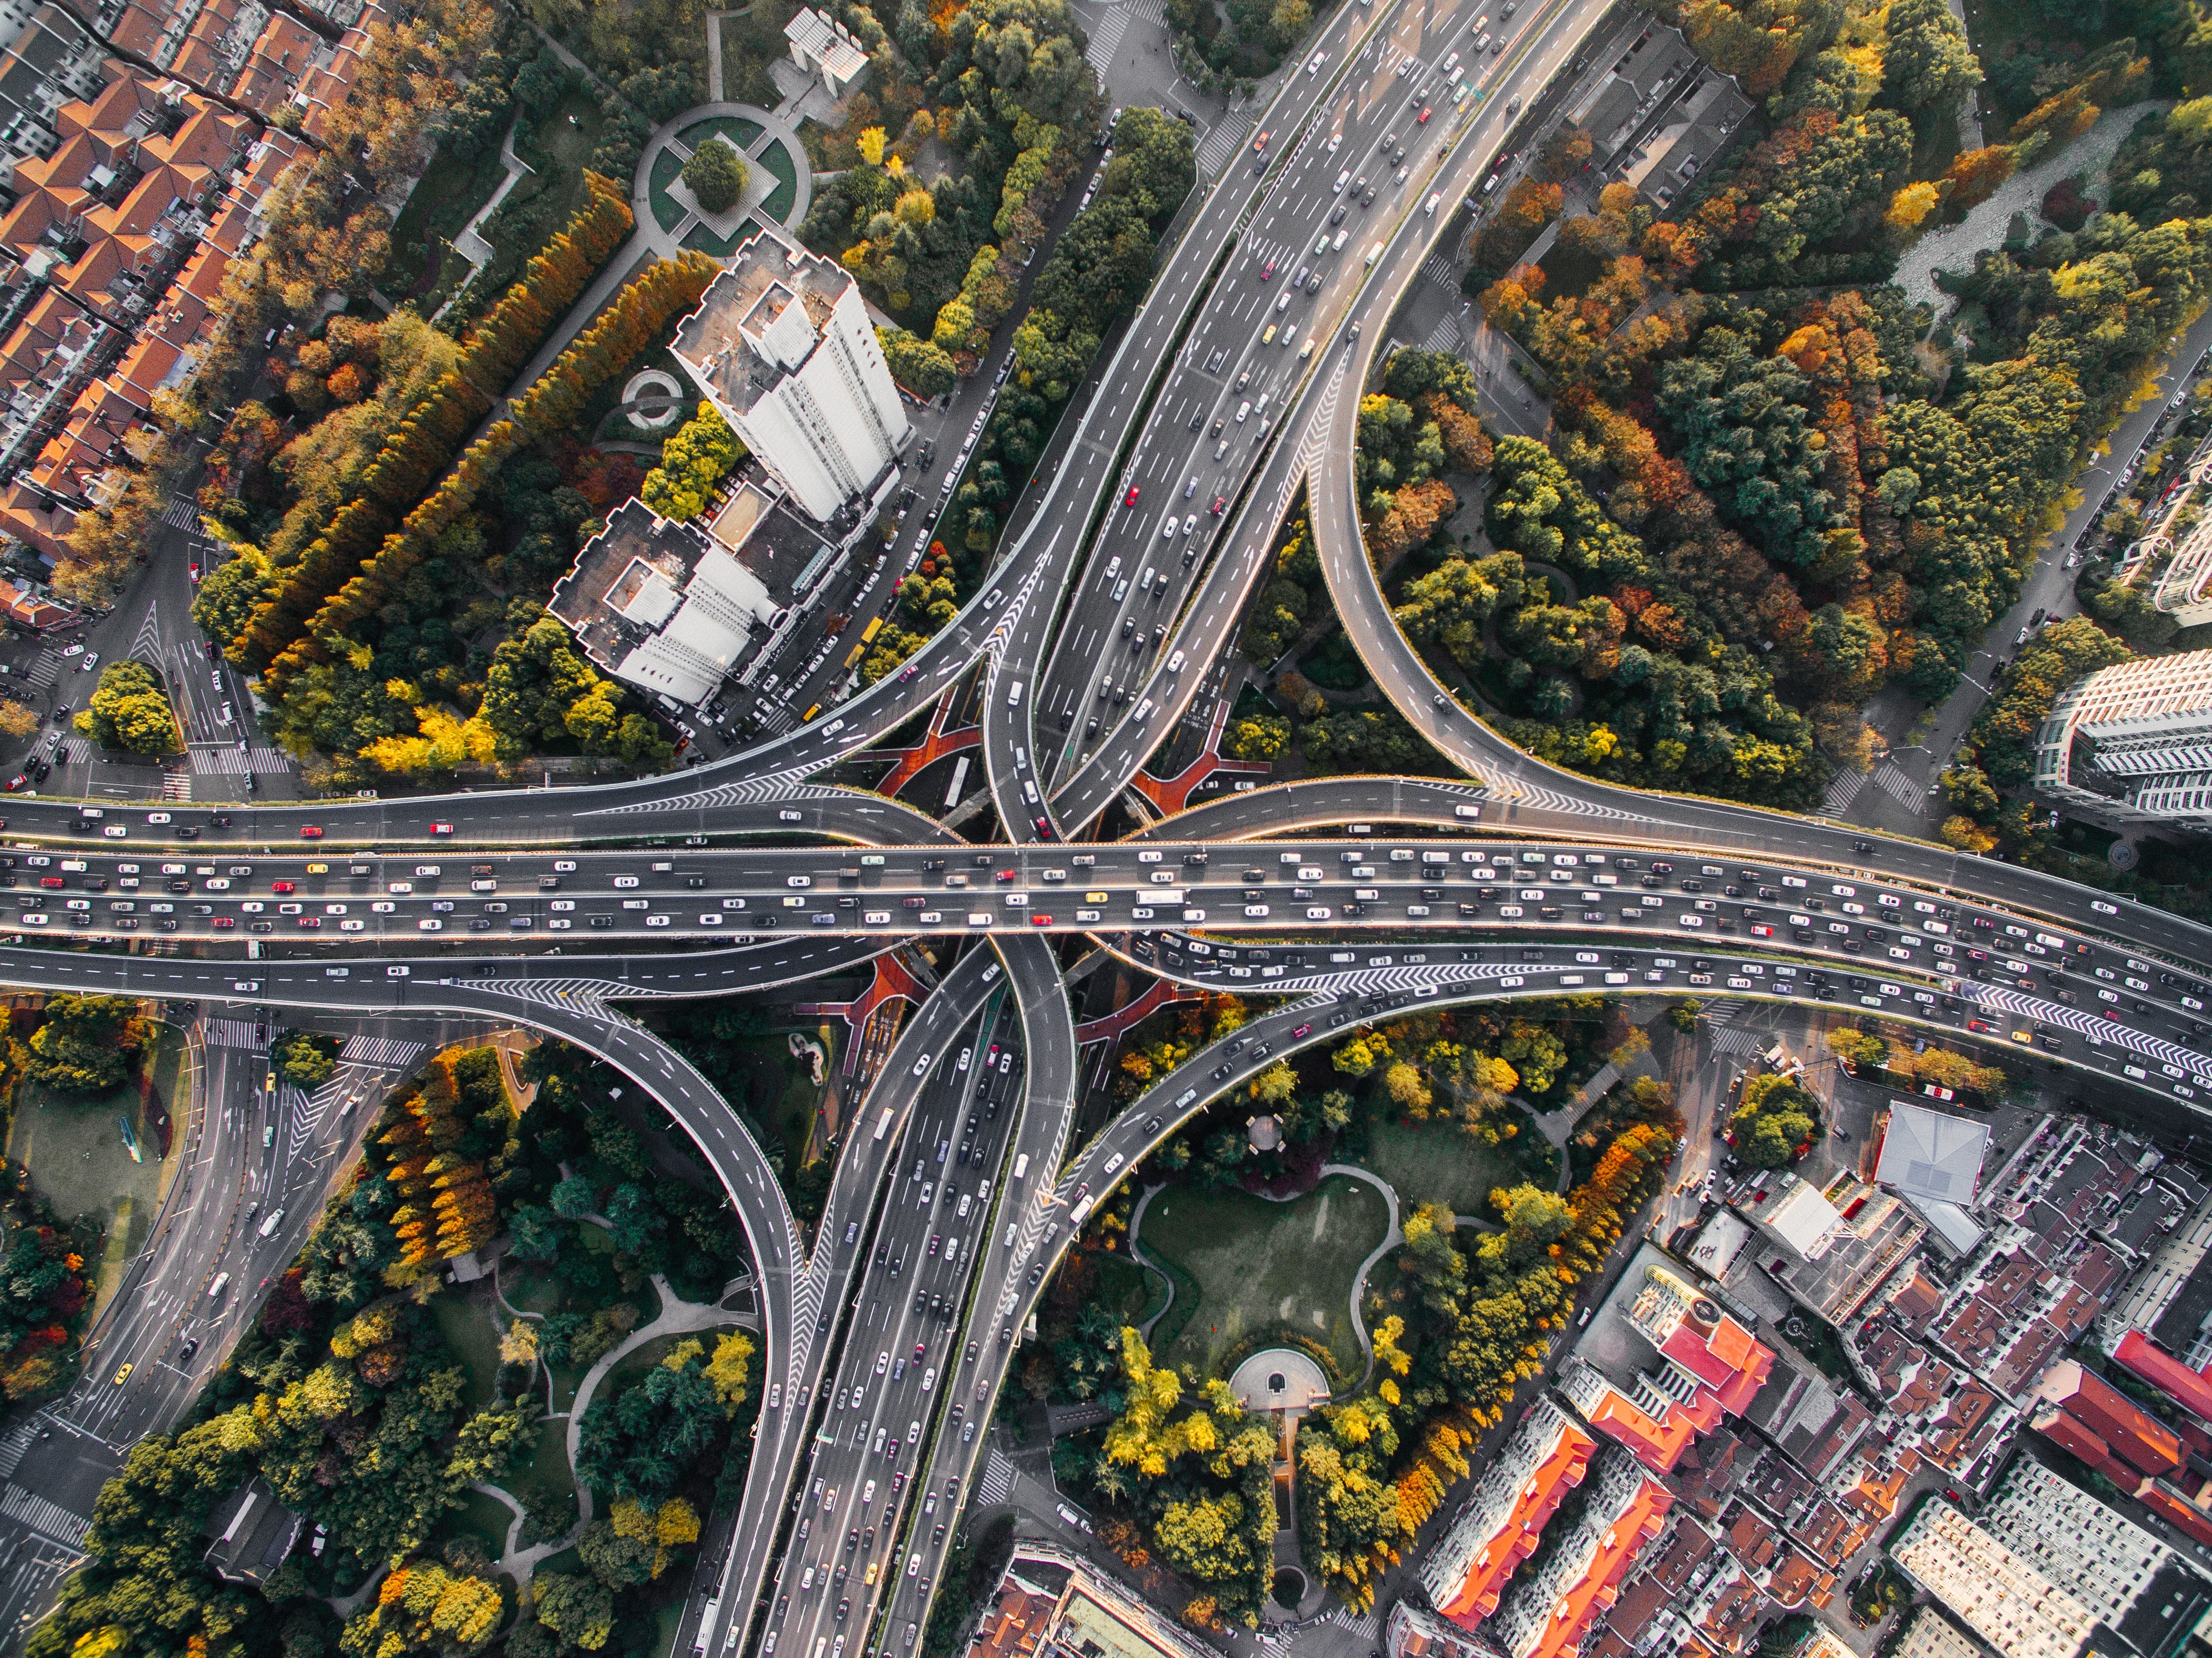 Aerial view of a busy highway intersection